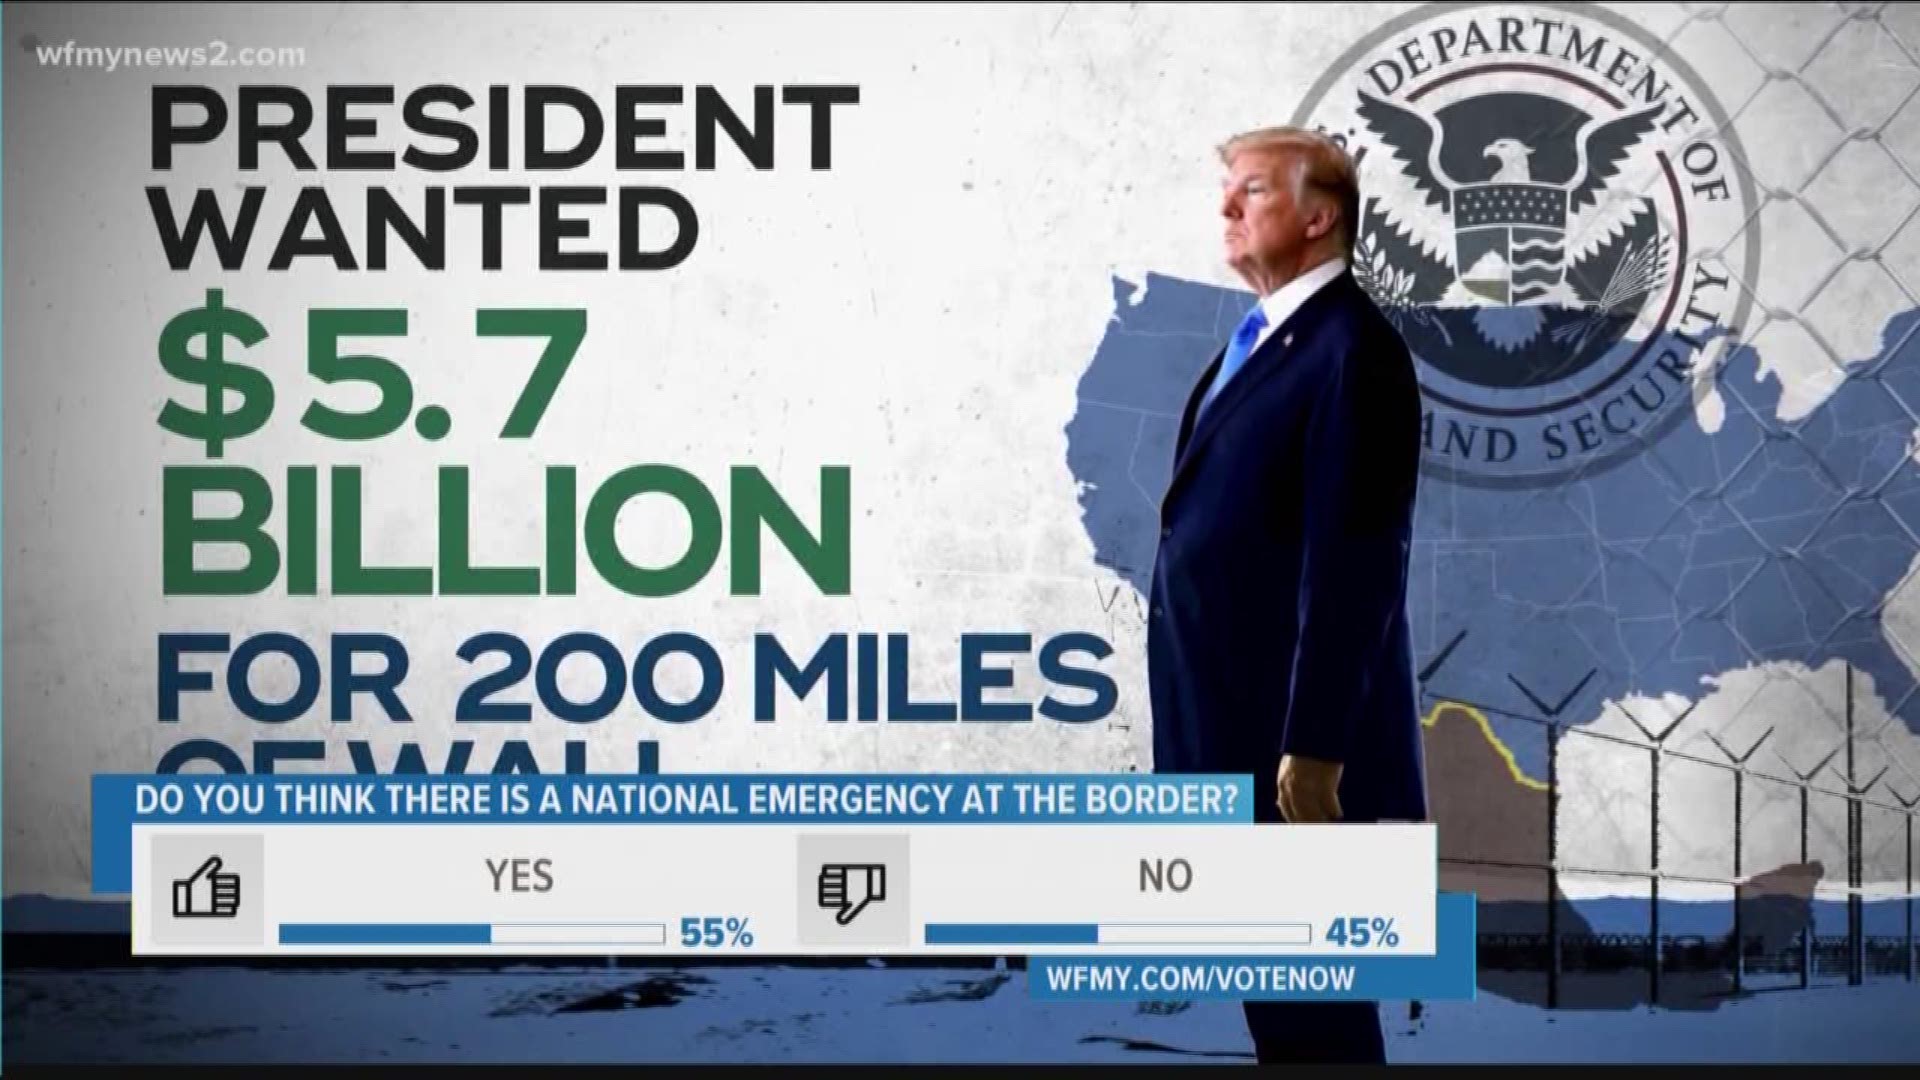 After reaching a compromise for some of the border wall funding, President Trump declared a national emergency to find funding for the wall from other government departments.